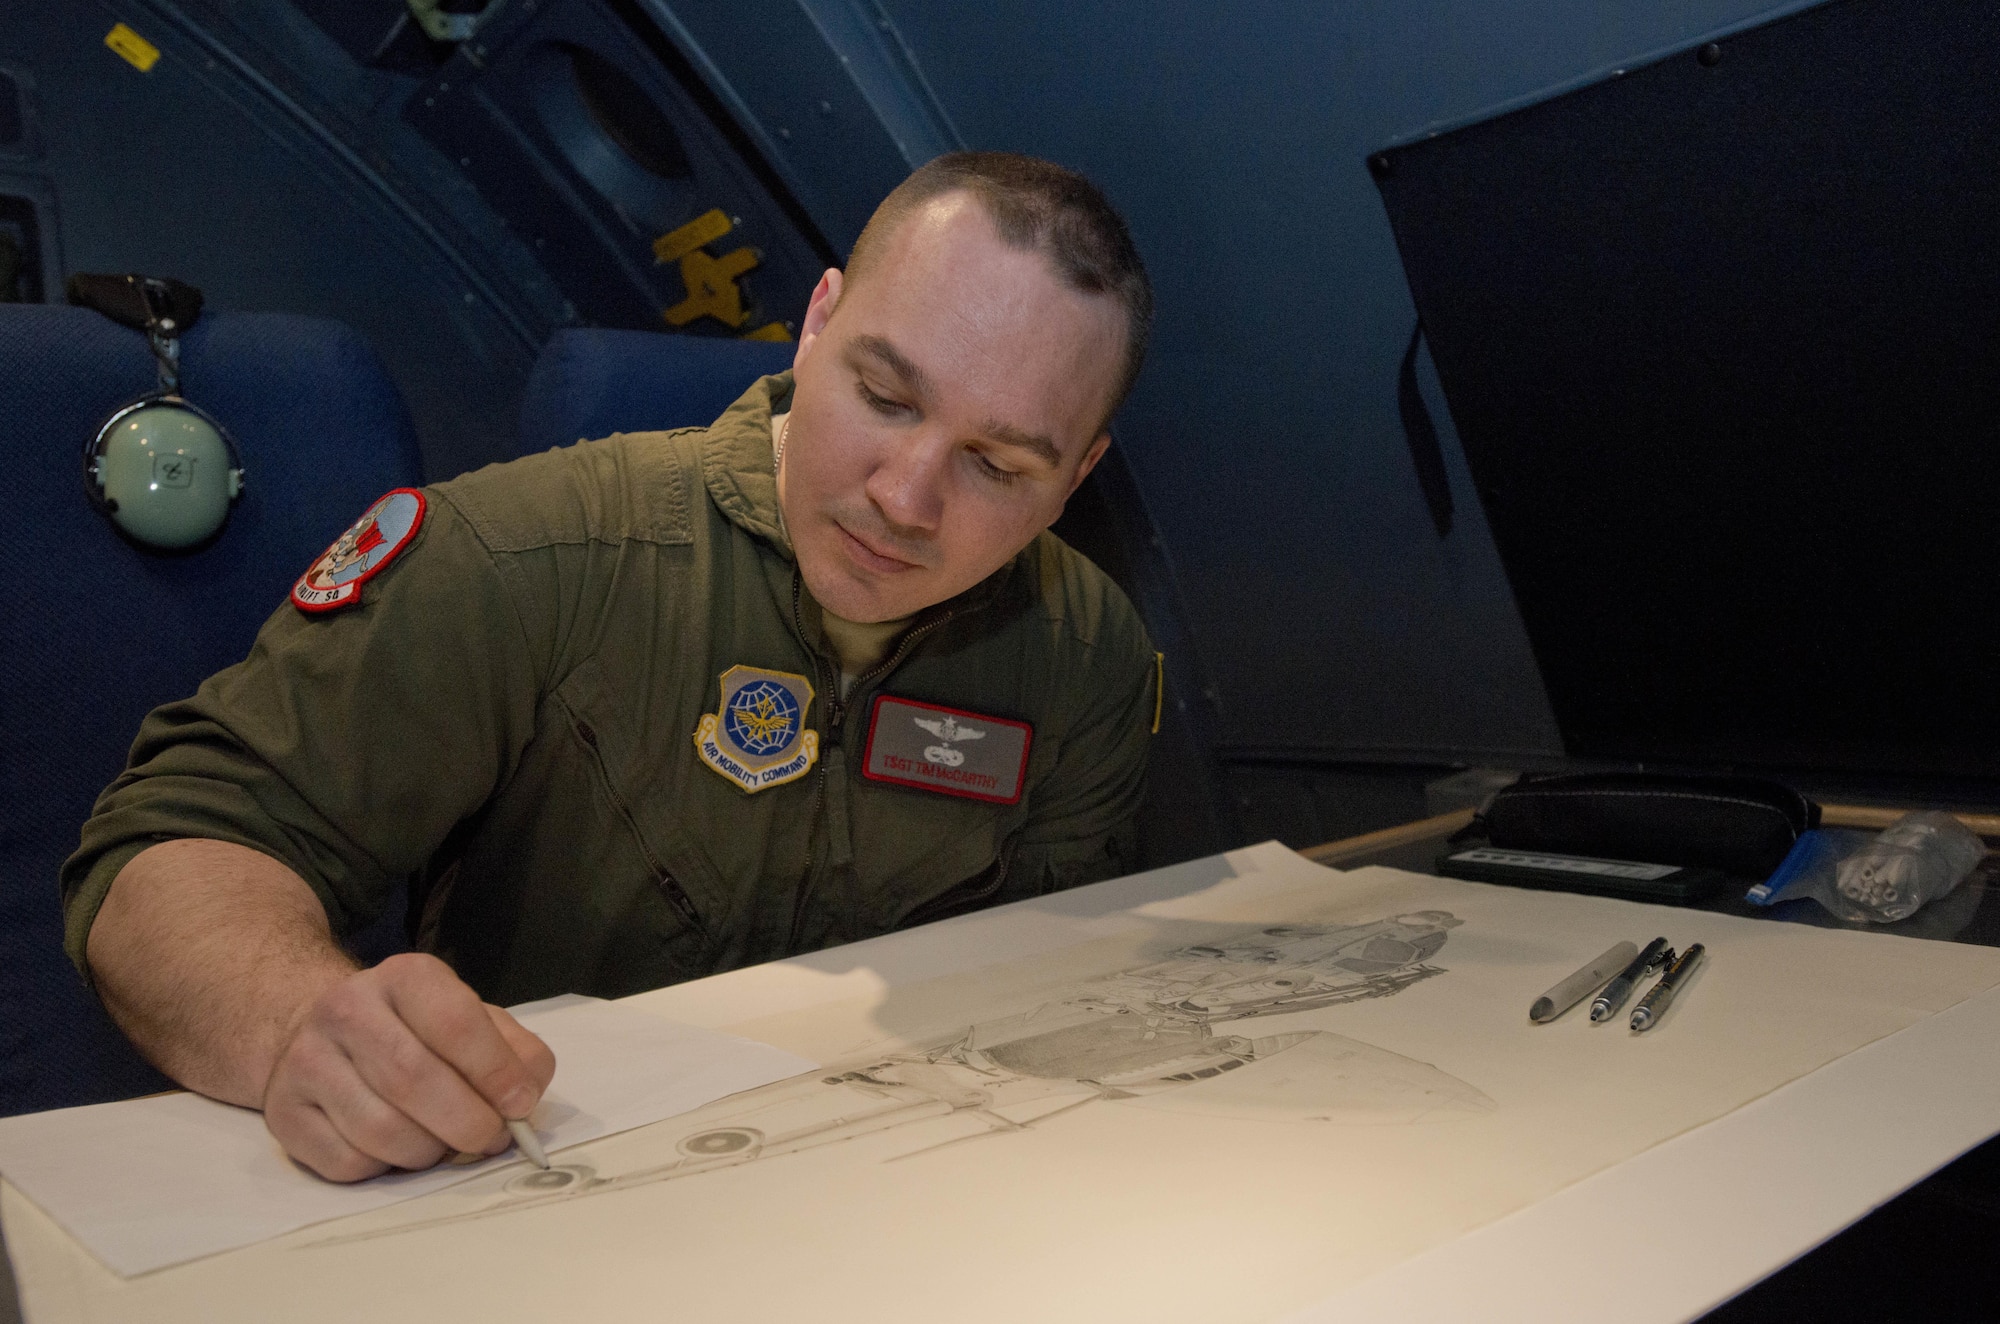 Tech Sgt. Timothy McCarthy, 22nd Airlift Squadron, adds details to a drawing he plans to give to an individual leaving, during some down time on a recent mission to Japan March 3, 2017. McCarthy is a self taught artist who has done drawings and painting throughtout the squadron as well as for going away presents when he's not doing flight engineer duties. (U.S. Air Force photo/Staff Sgt. Nicole Leidholm)